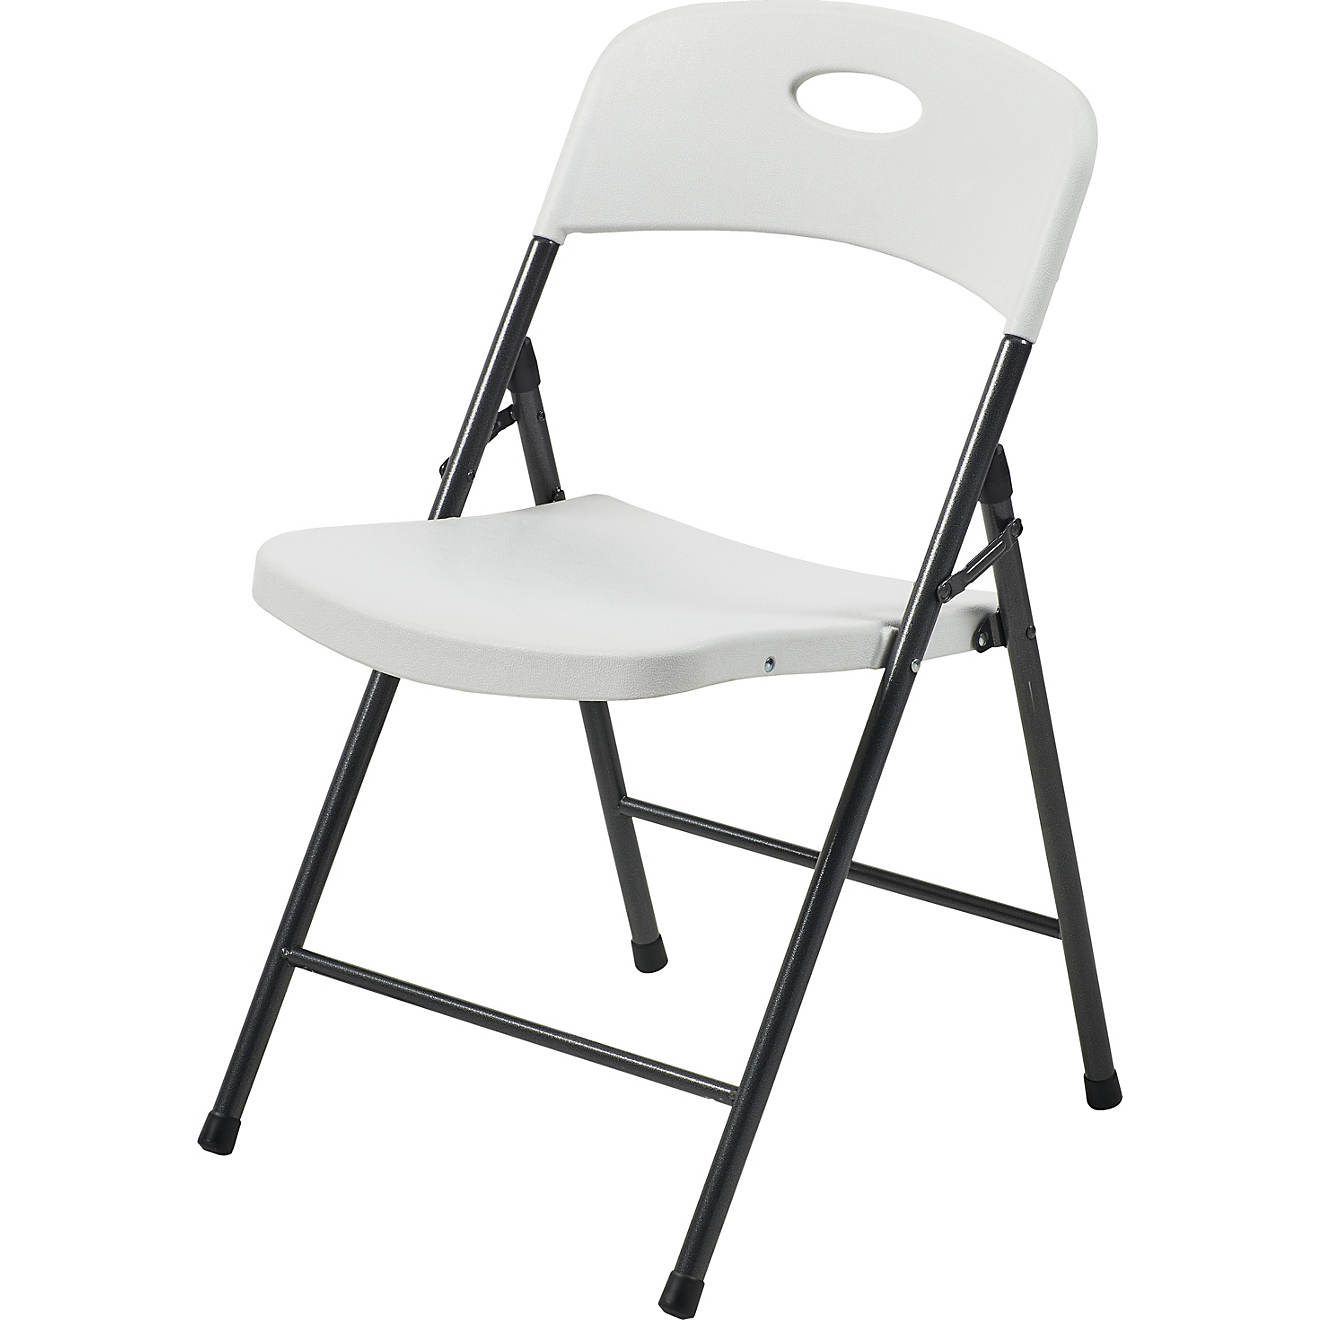 sports outdoor chairs